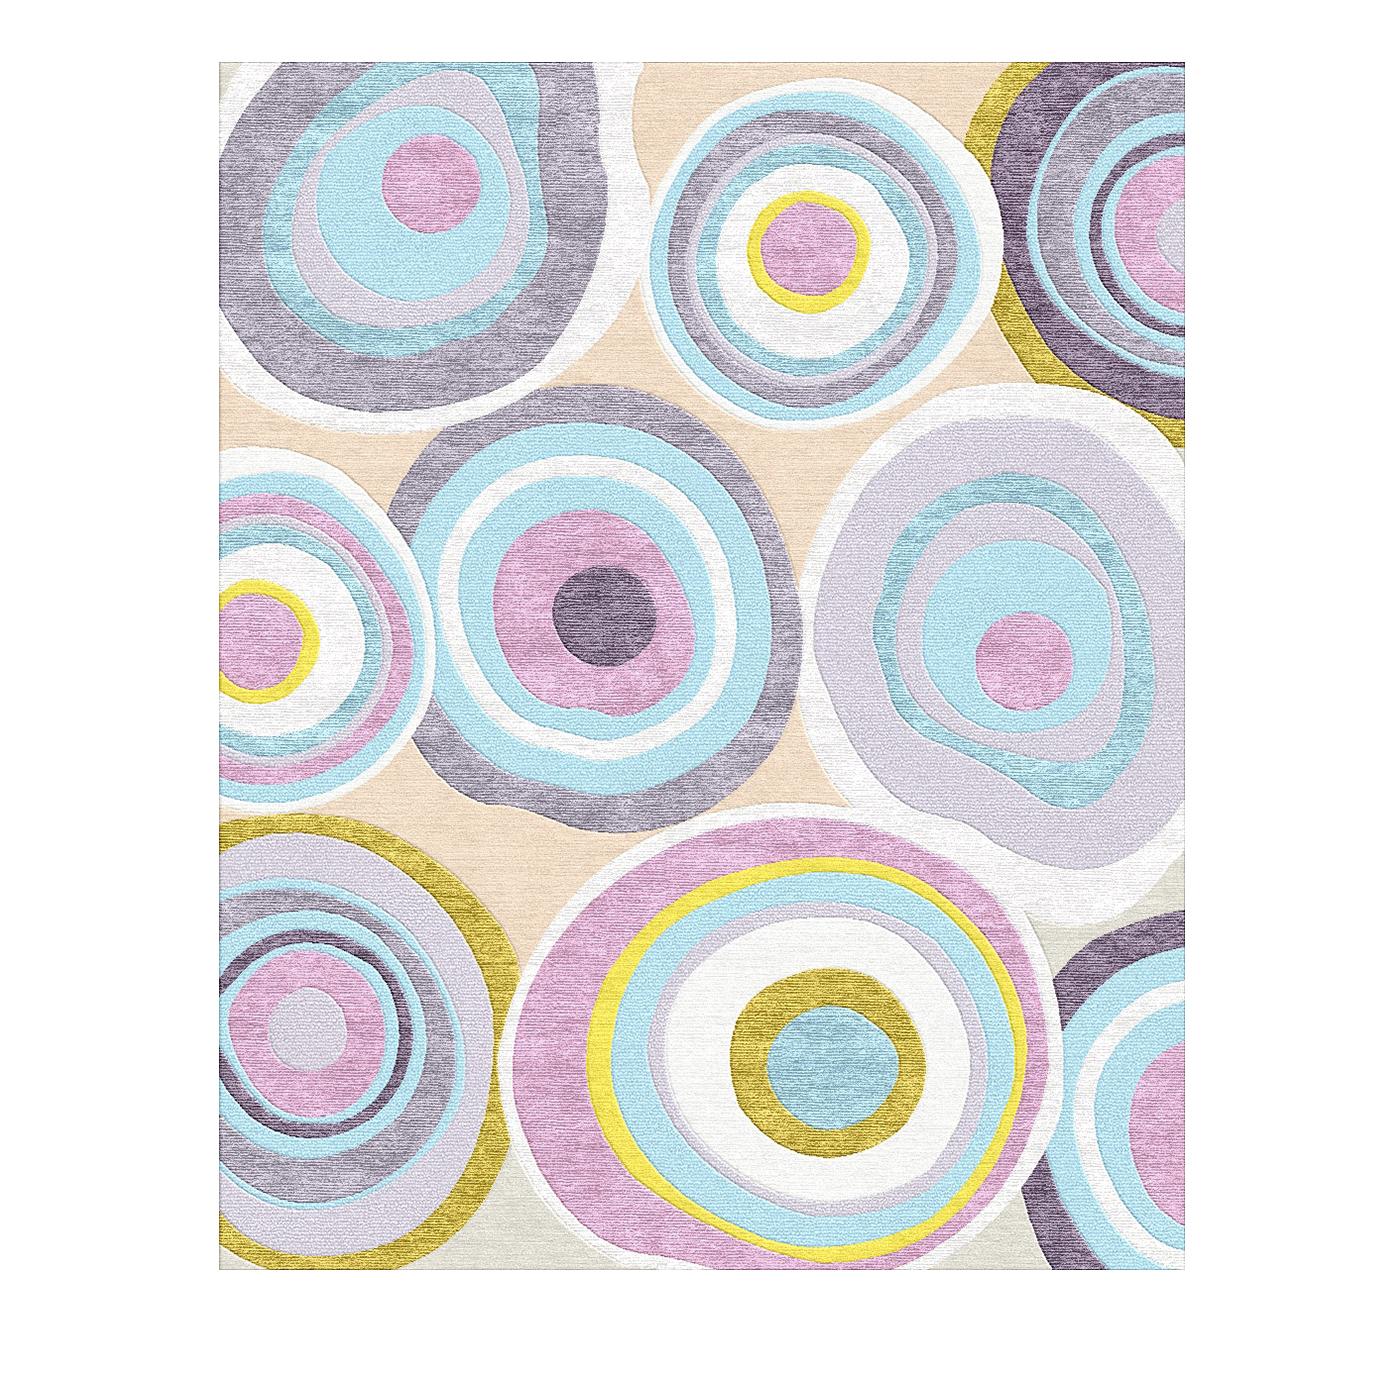 Captivating in its simplicity, this elegant rug boasts a whimsical design of colorful, irregularly-shaped concentric circles. The piece is distinguished for its dynamic combinations of light pastel colors of lavender, sky-blue, and blush and